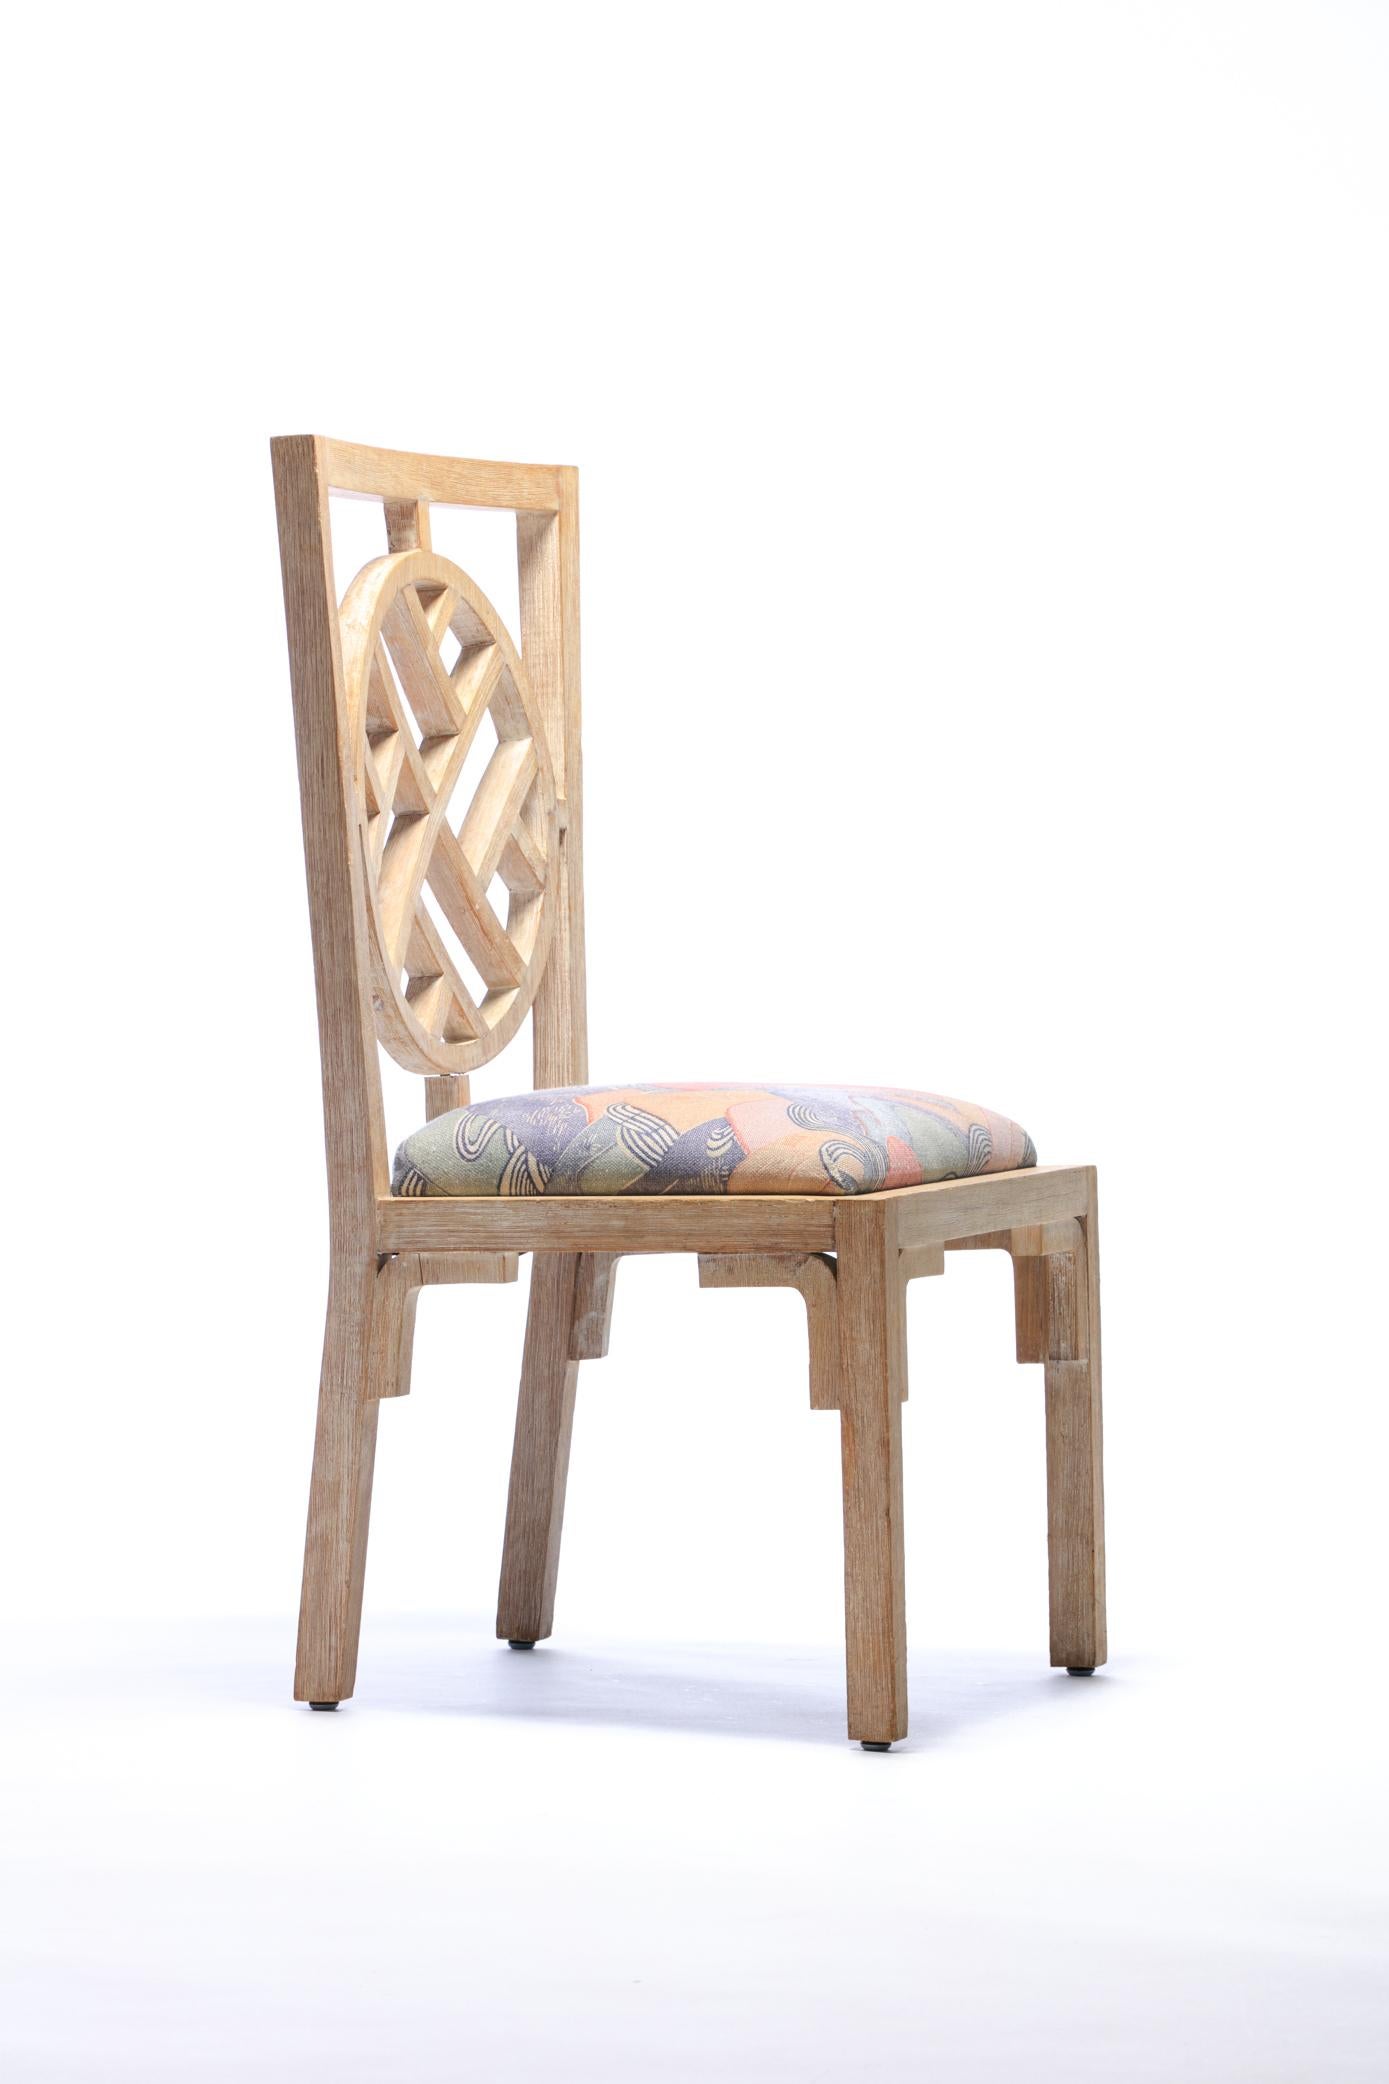 Cerused wood frame side chair with Asian Motif selected by Kelly Wearstler for her project - Miami Viceroy, circa 2008. A chic chair that has been updated in Kelly Wearstler for Groundworks / Lee Jofa linen fabric called Edo Linen in Opal colorway.